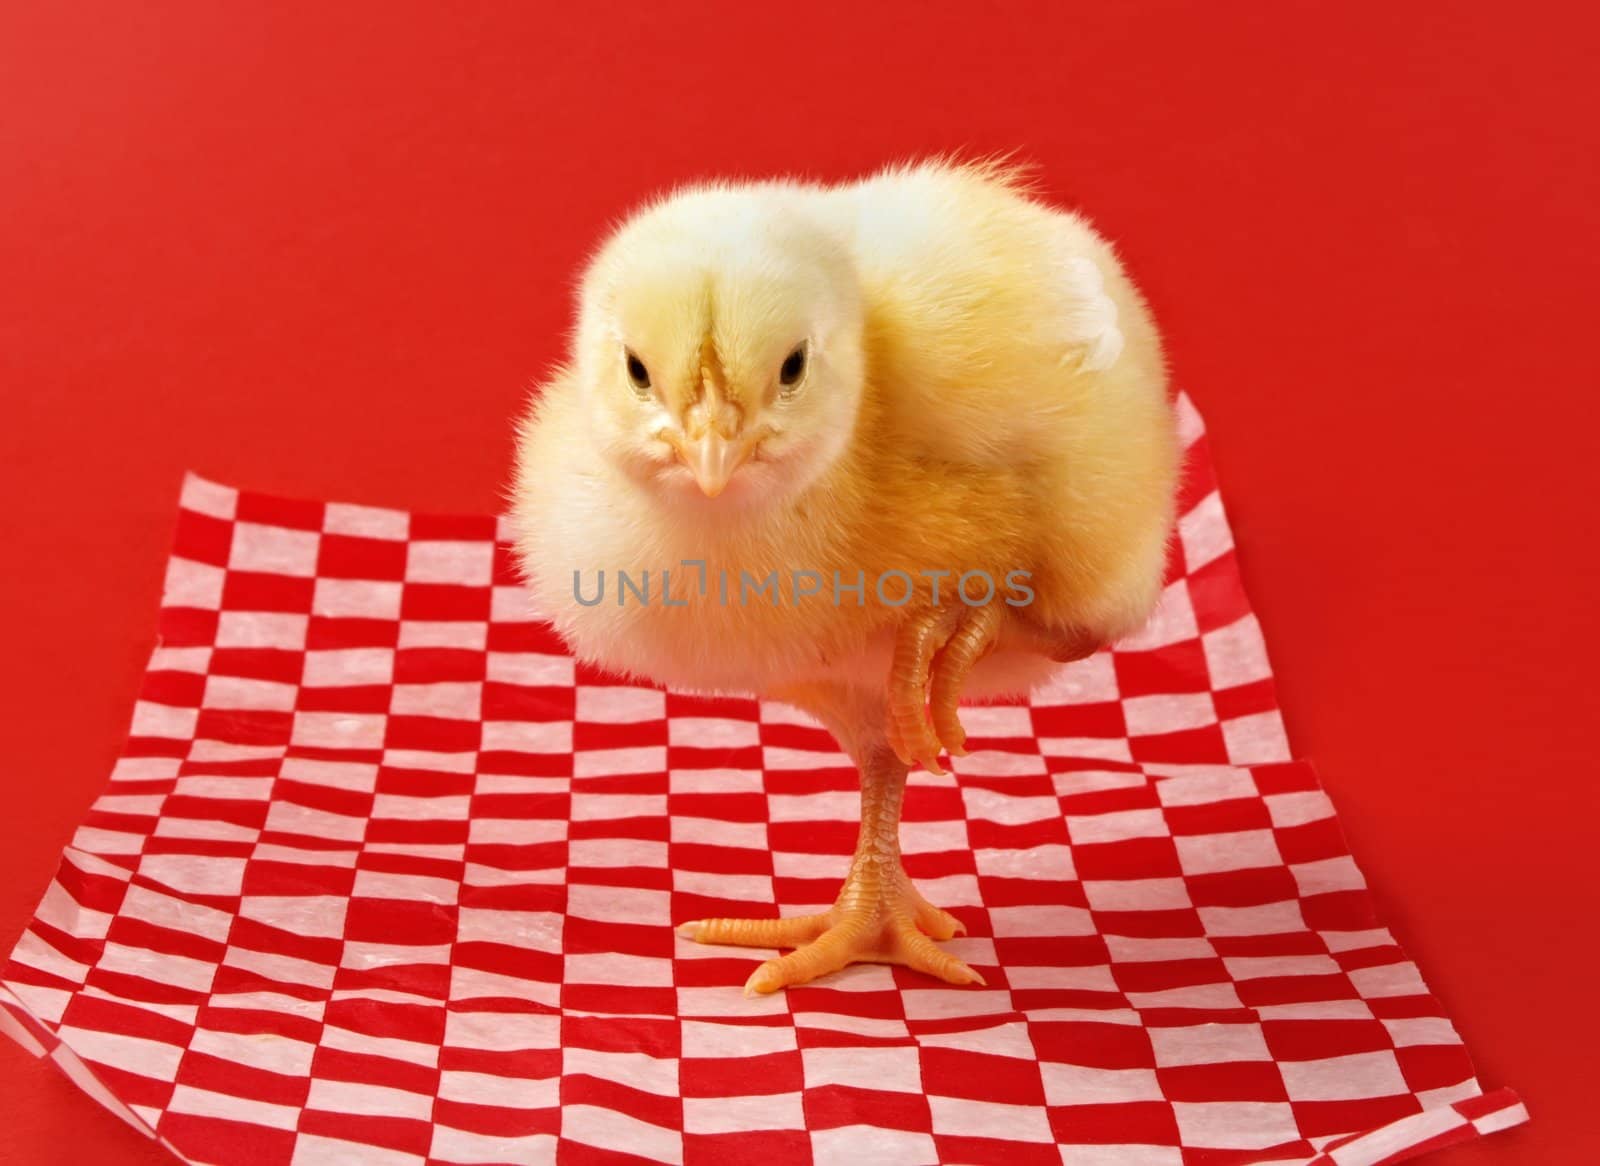 little yellow chick on food wrapping papier